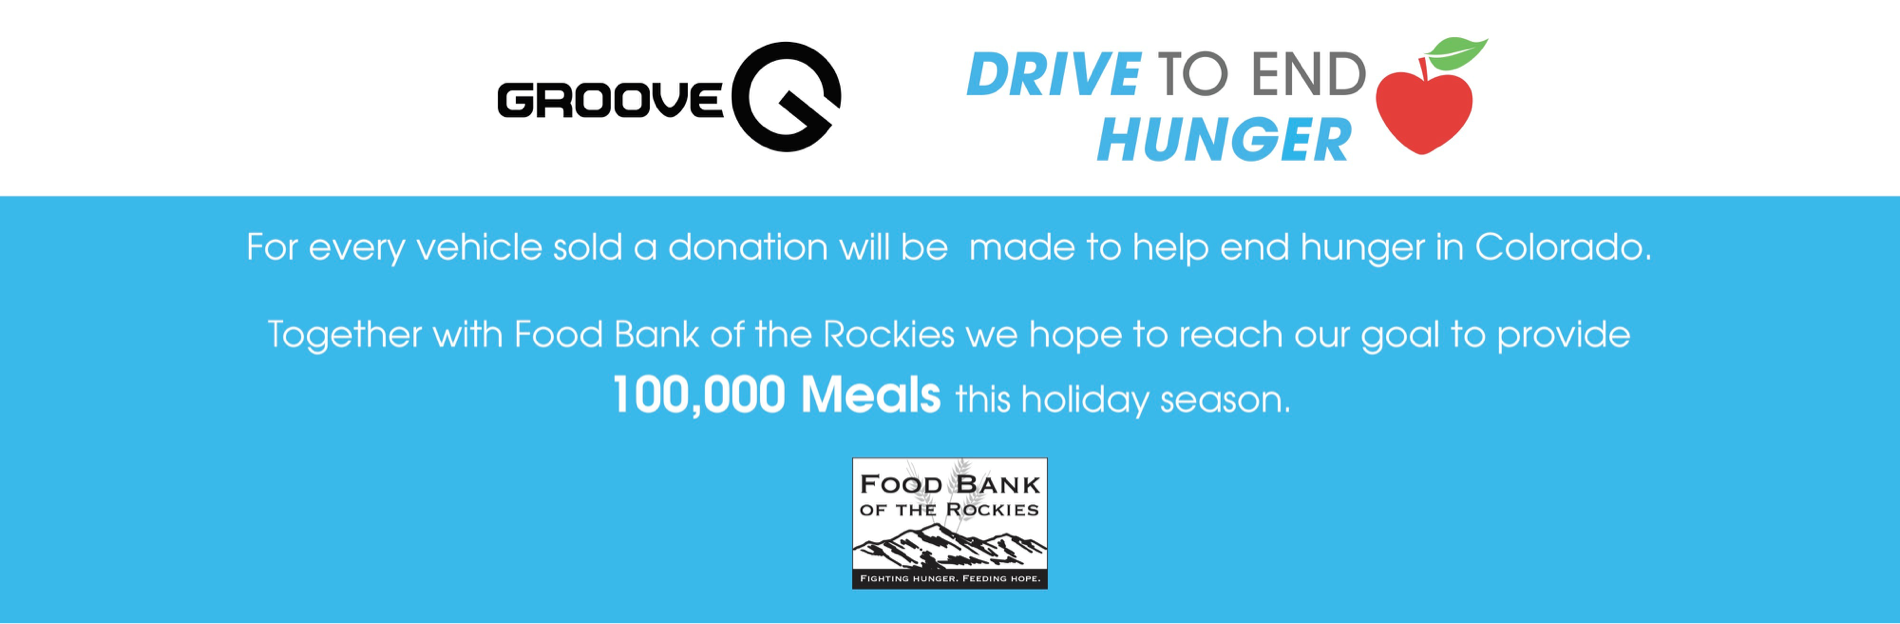 drive-to-end-hunger banner